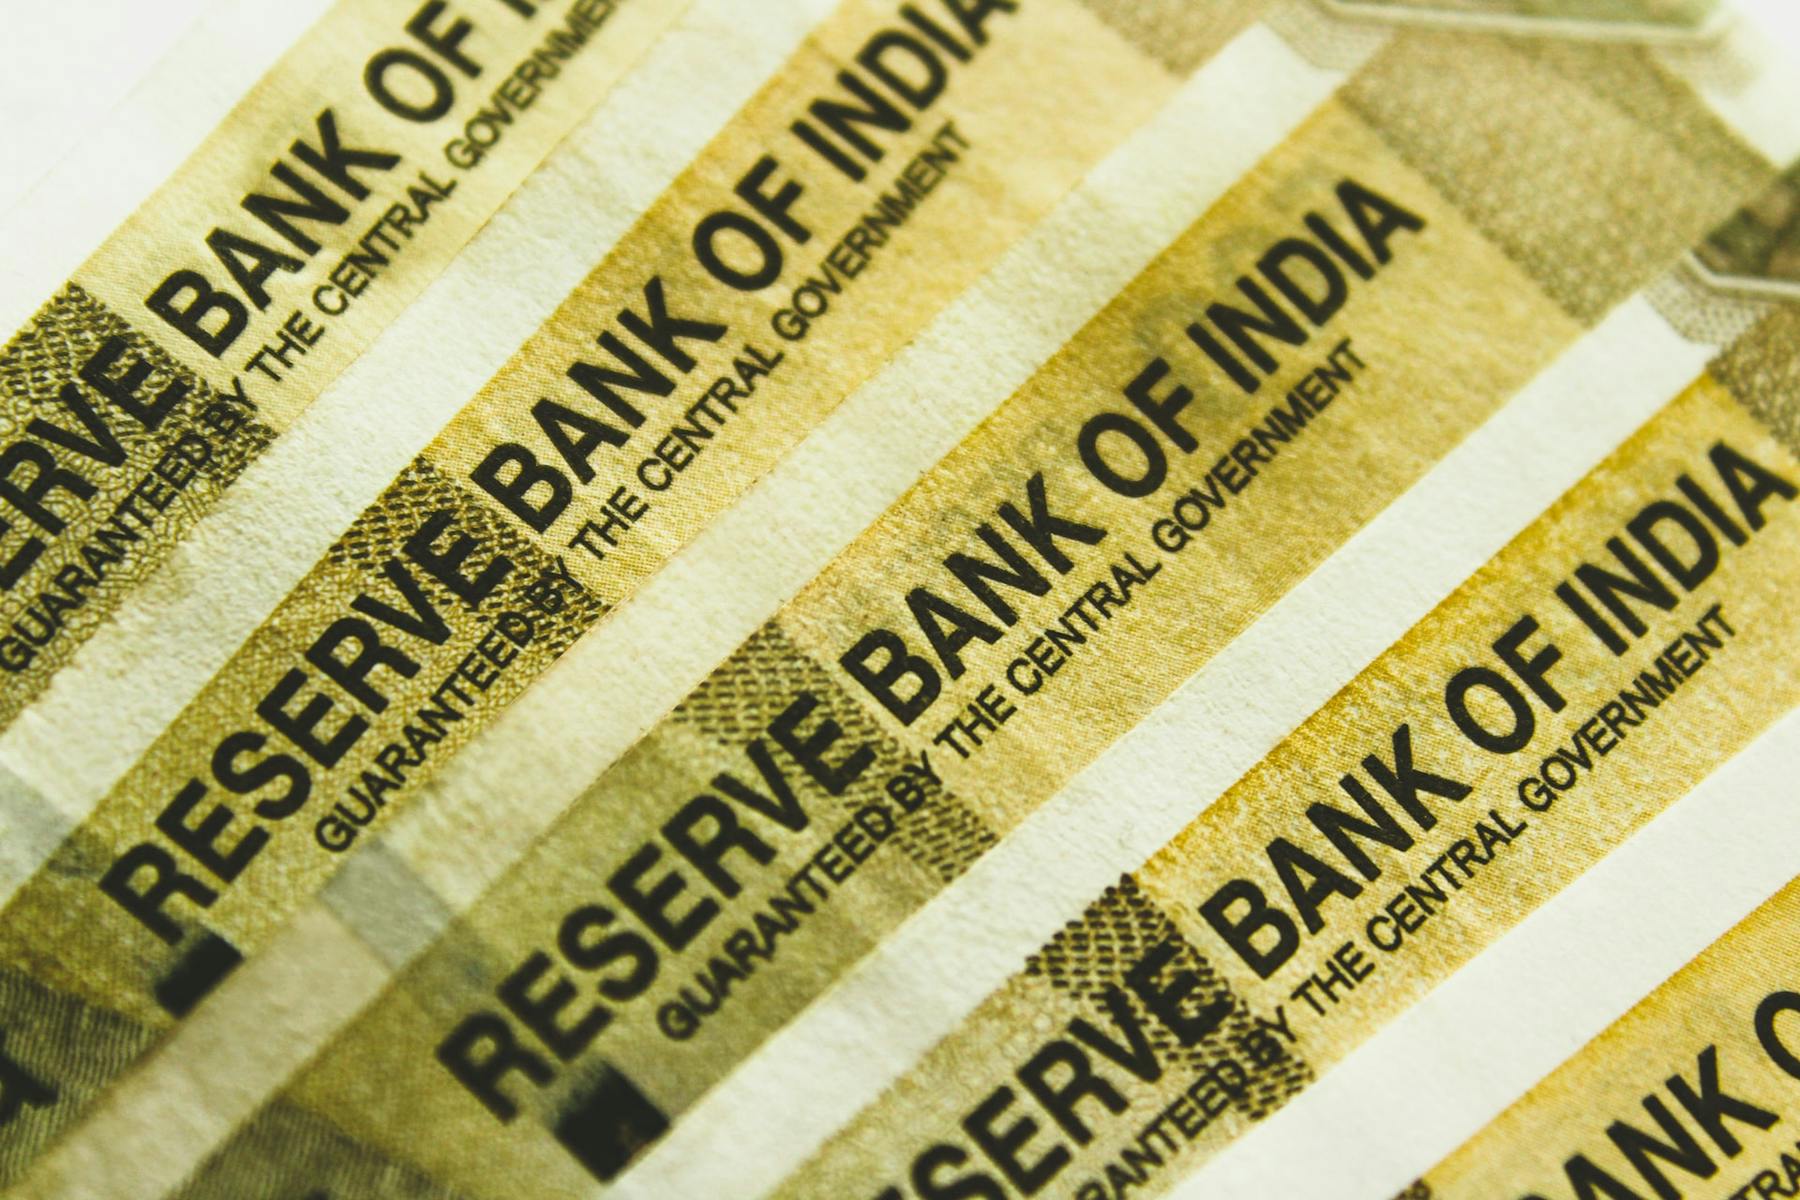 How can I transfer money from Indian bank to overseas bank?